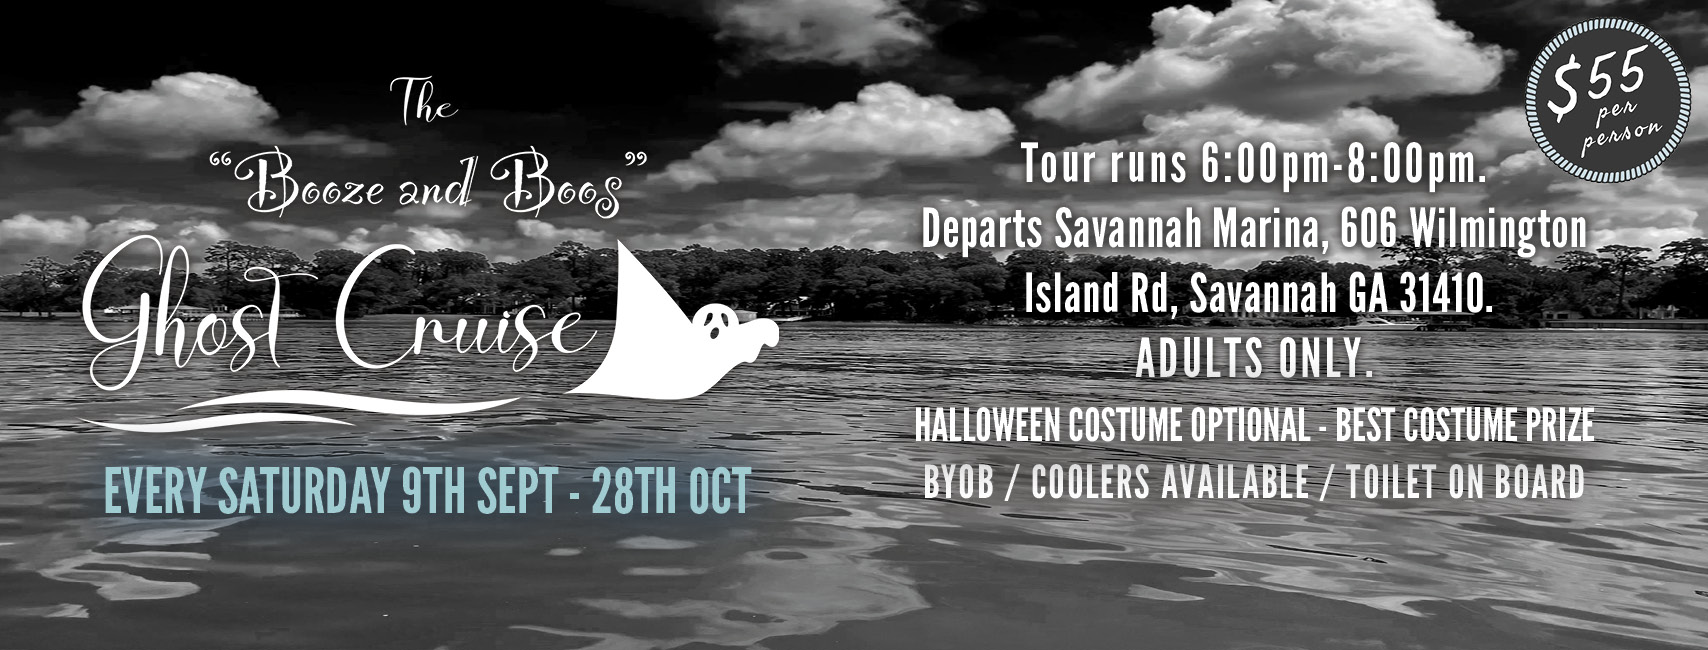 Booze and Boos Ghost Cruise